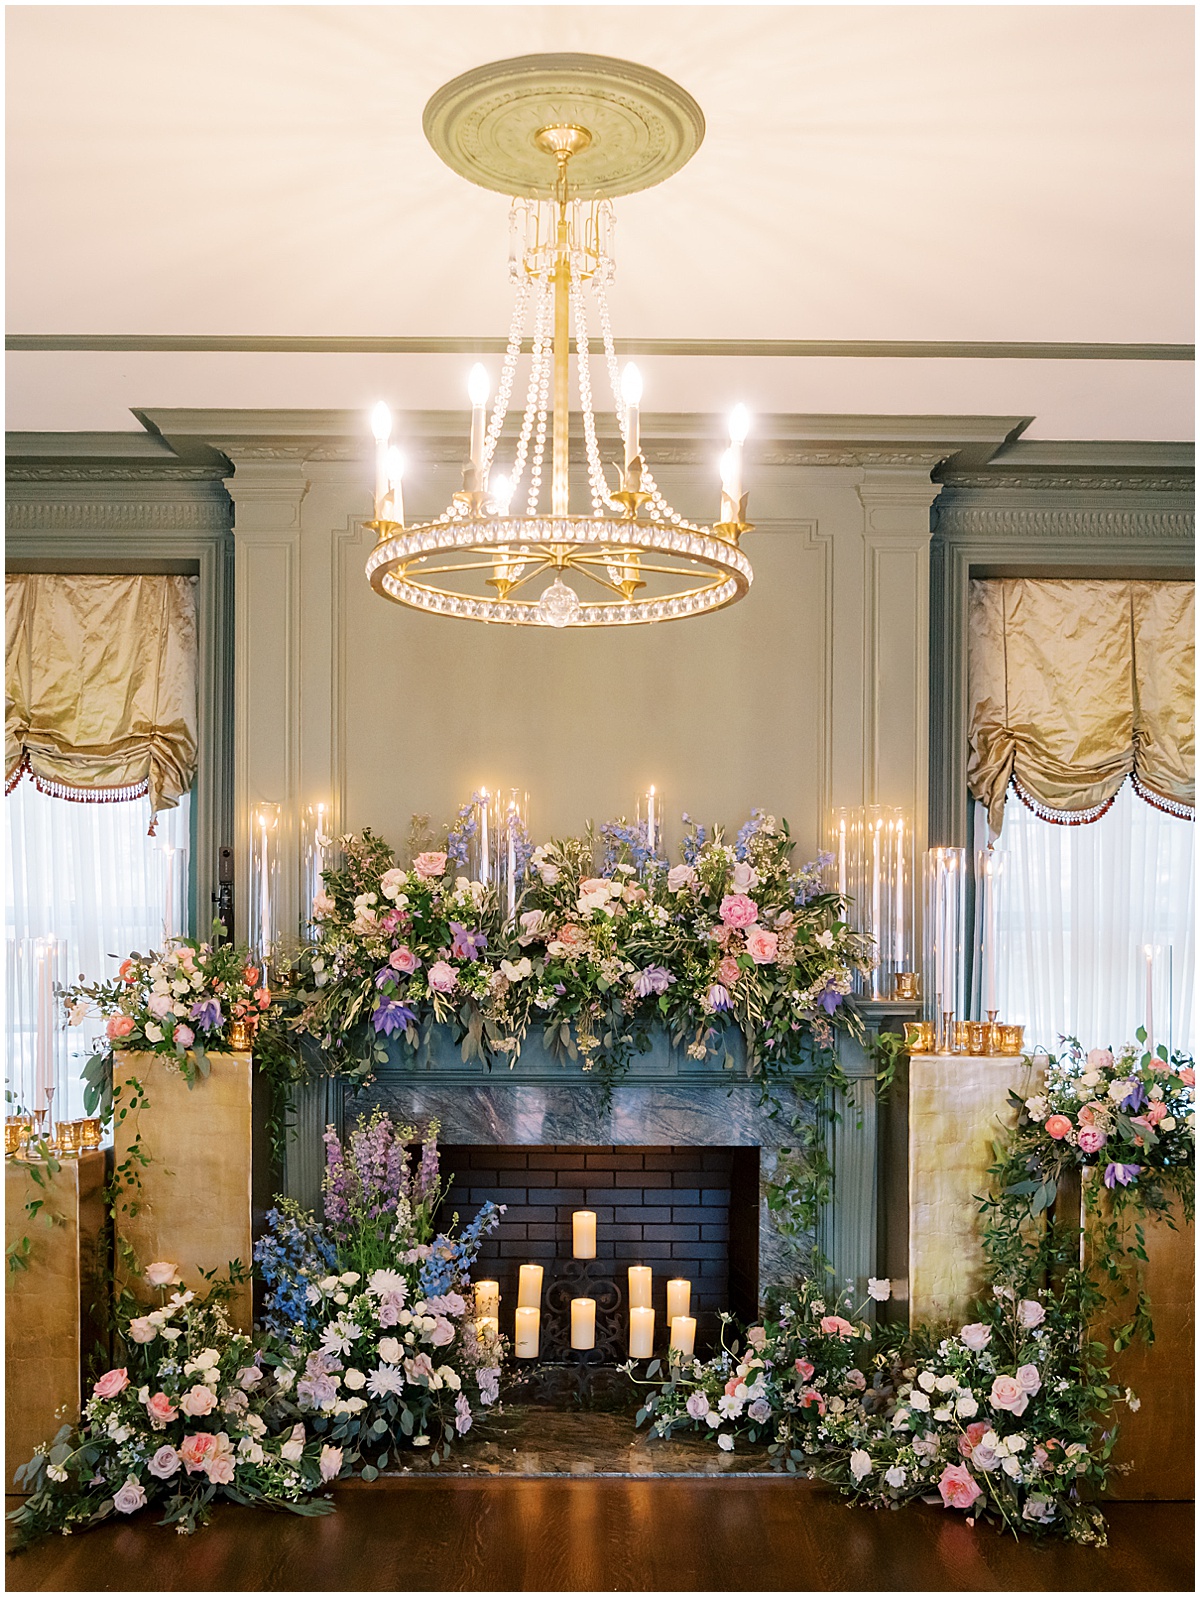 At Home Wedding Ceremony by Fireplace © Bonnie Sen Photography